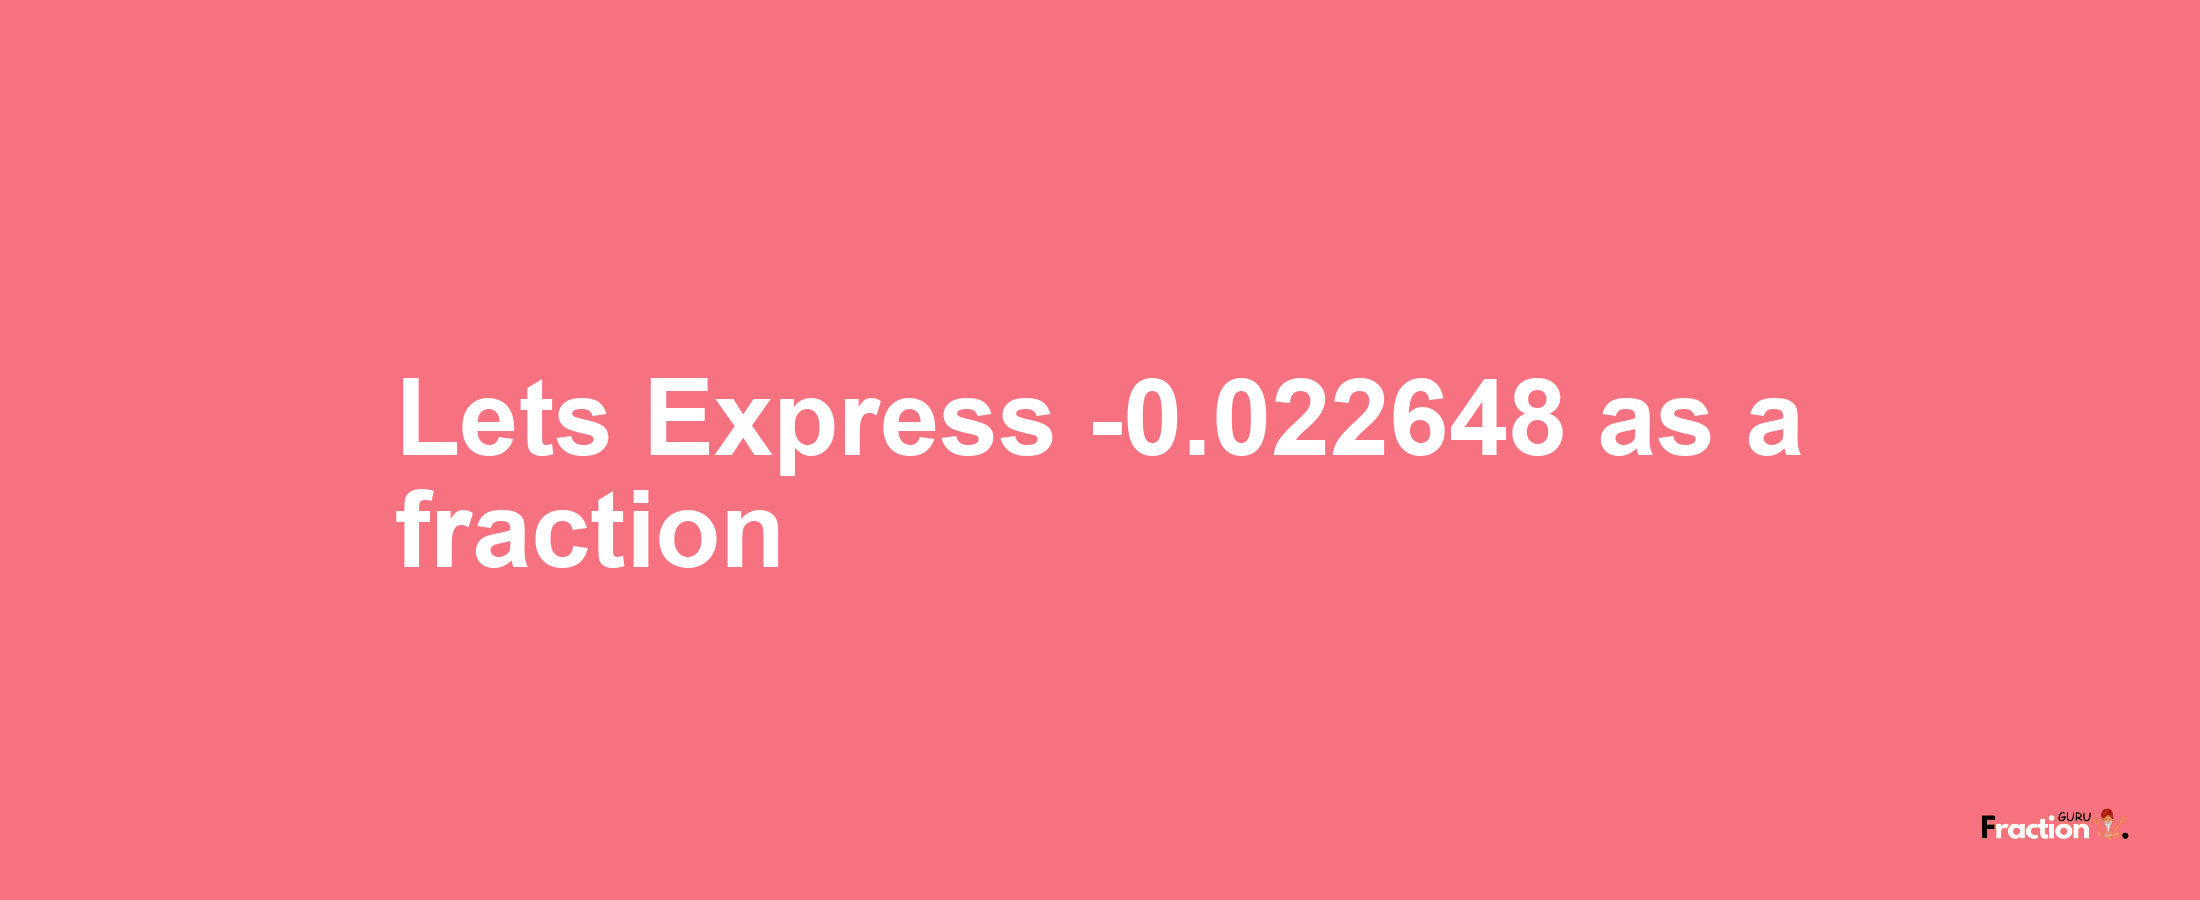 Lets Express -0.022648 as afraction